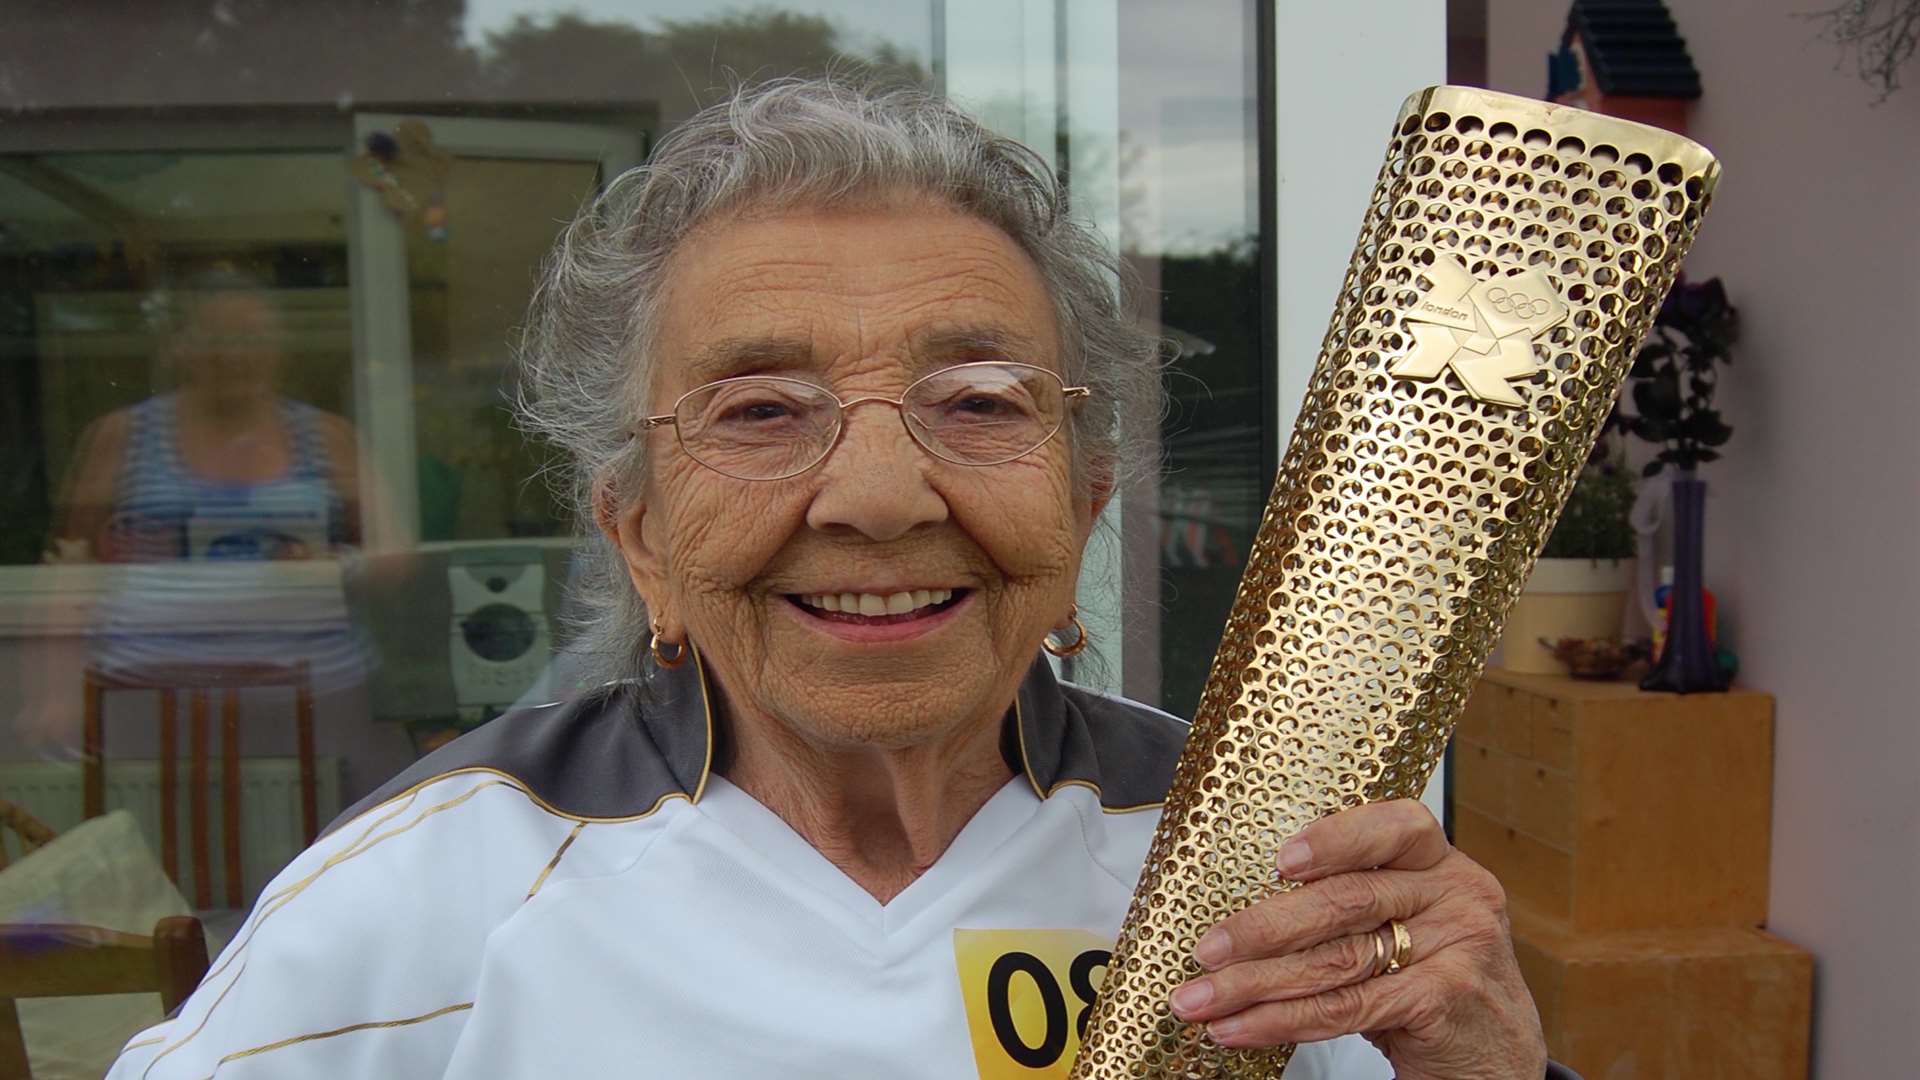 Paddy proudly holding the Olympic Torch in 2012